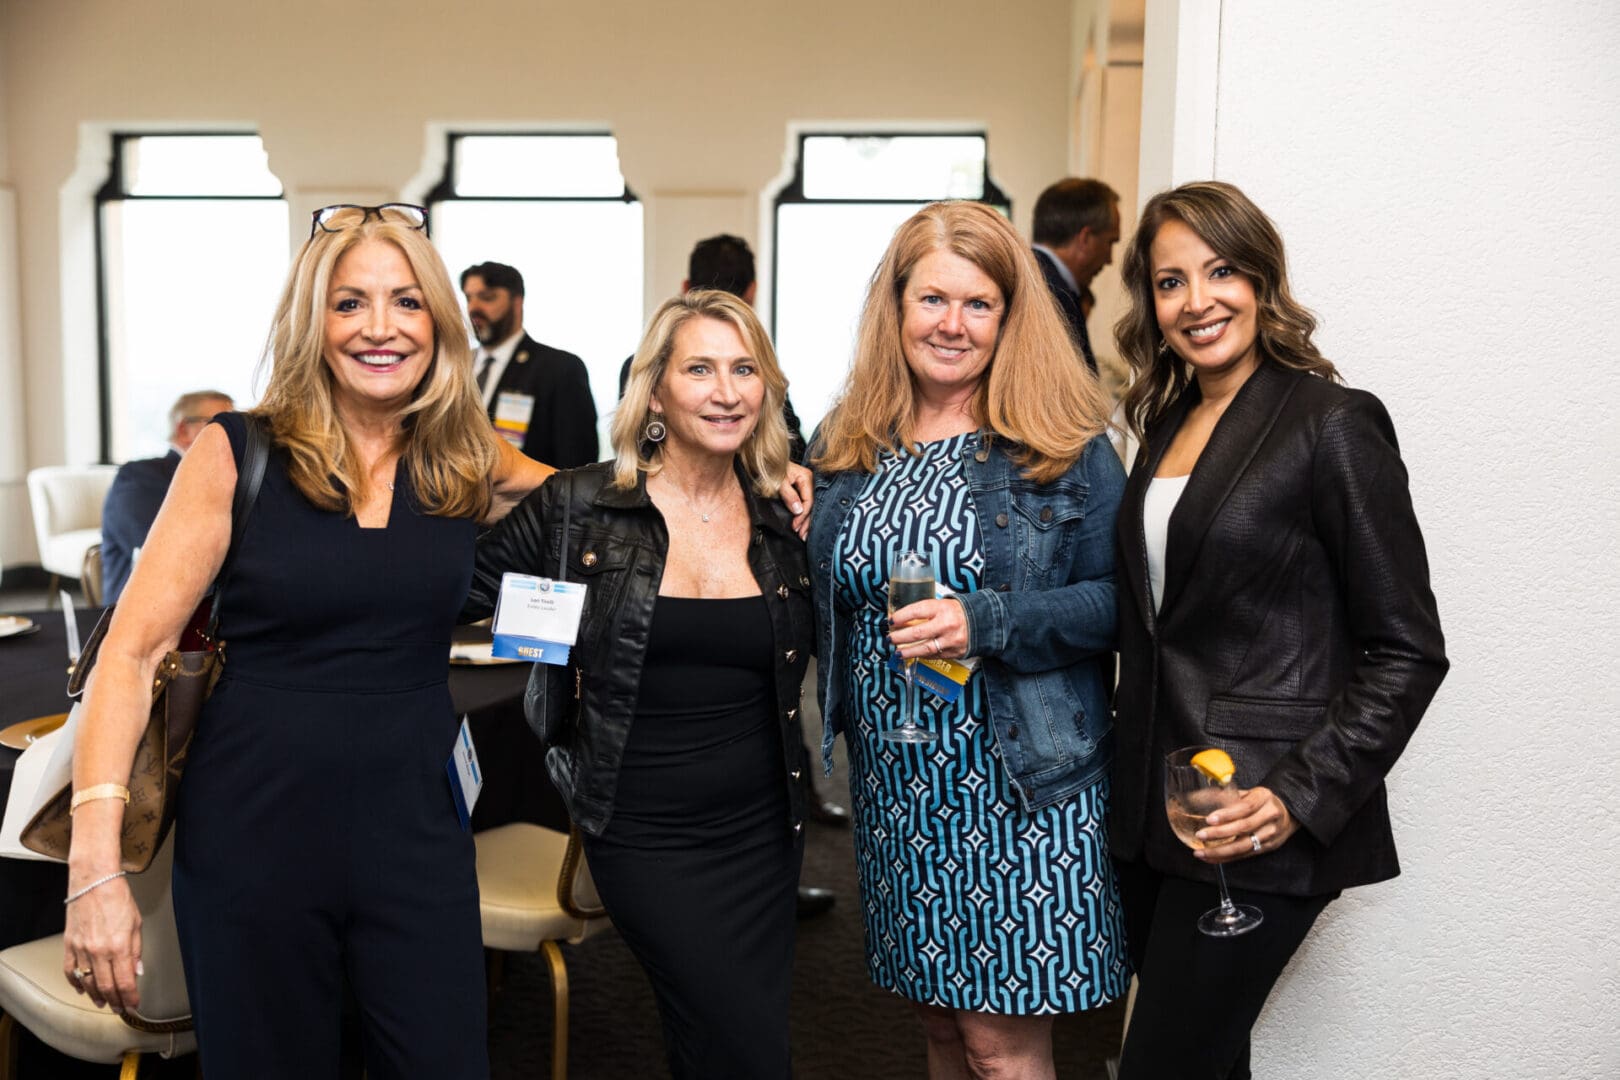 Four smiling women in business attire at an event.